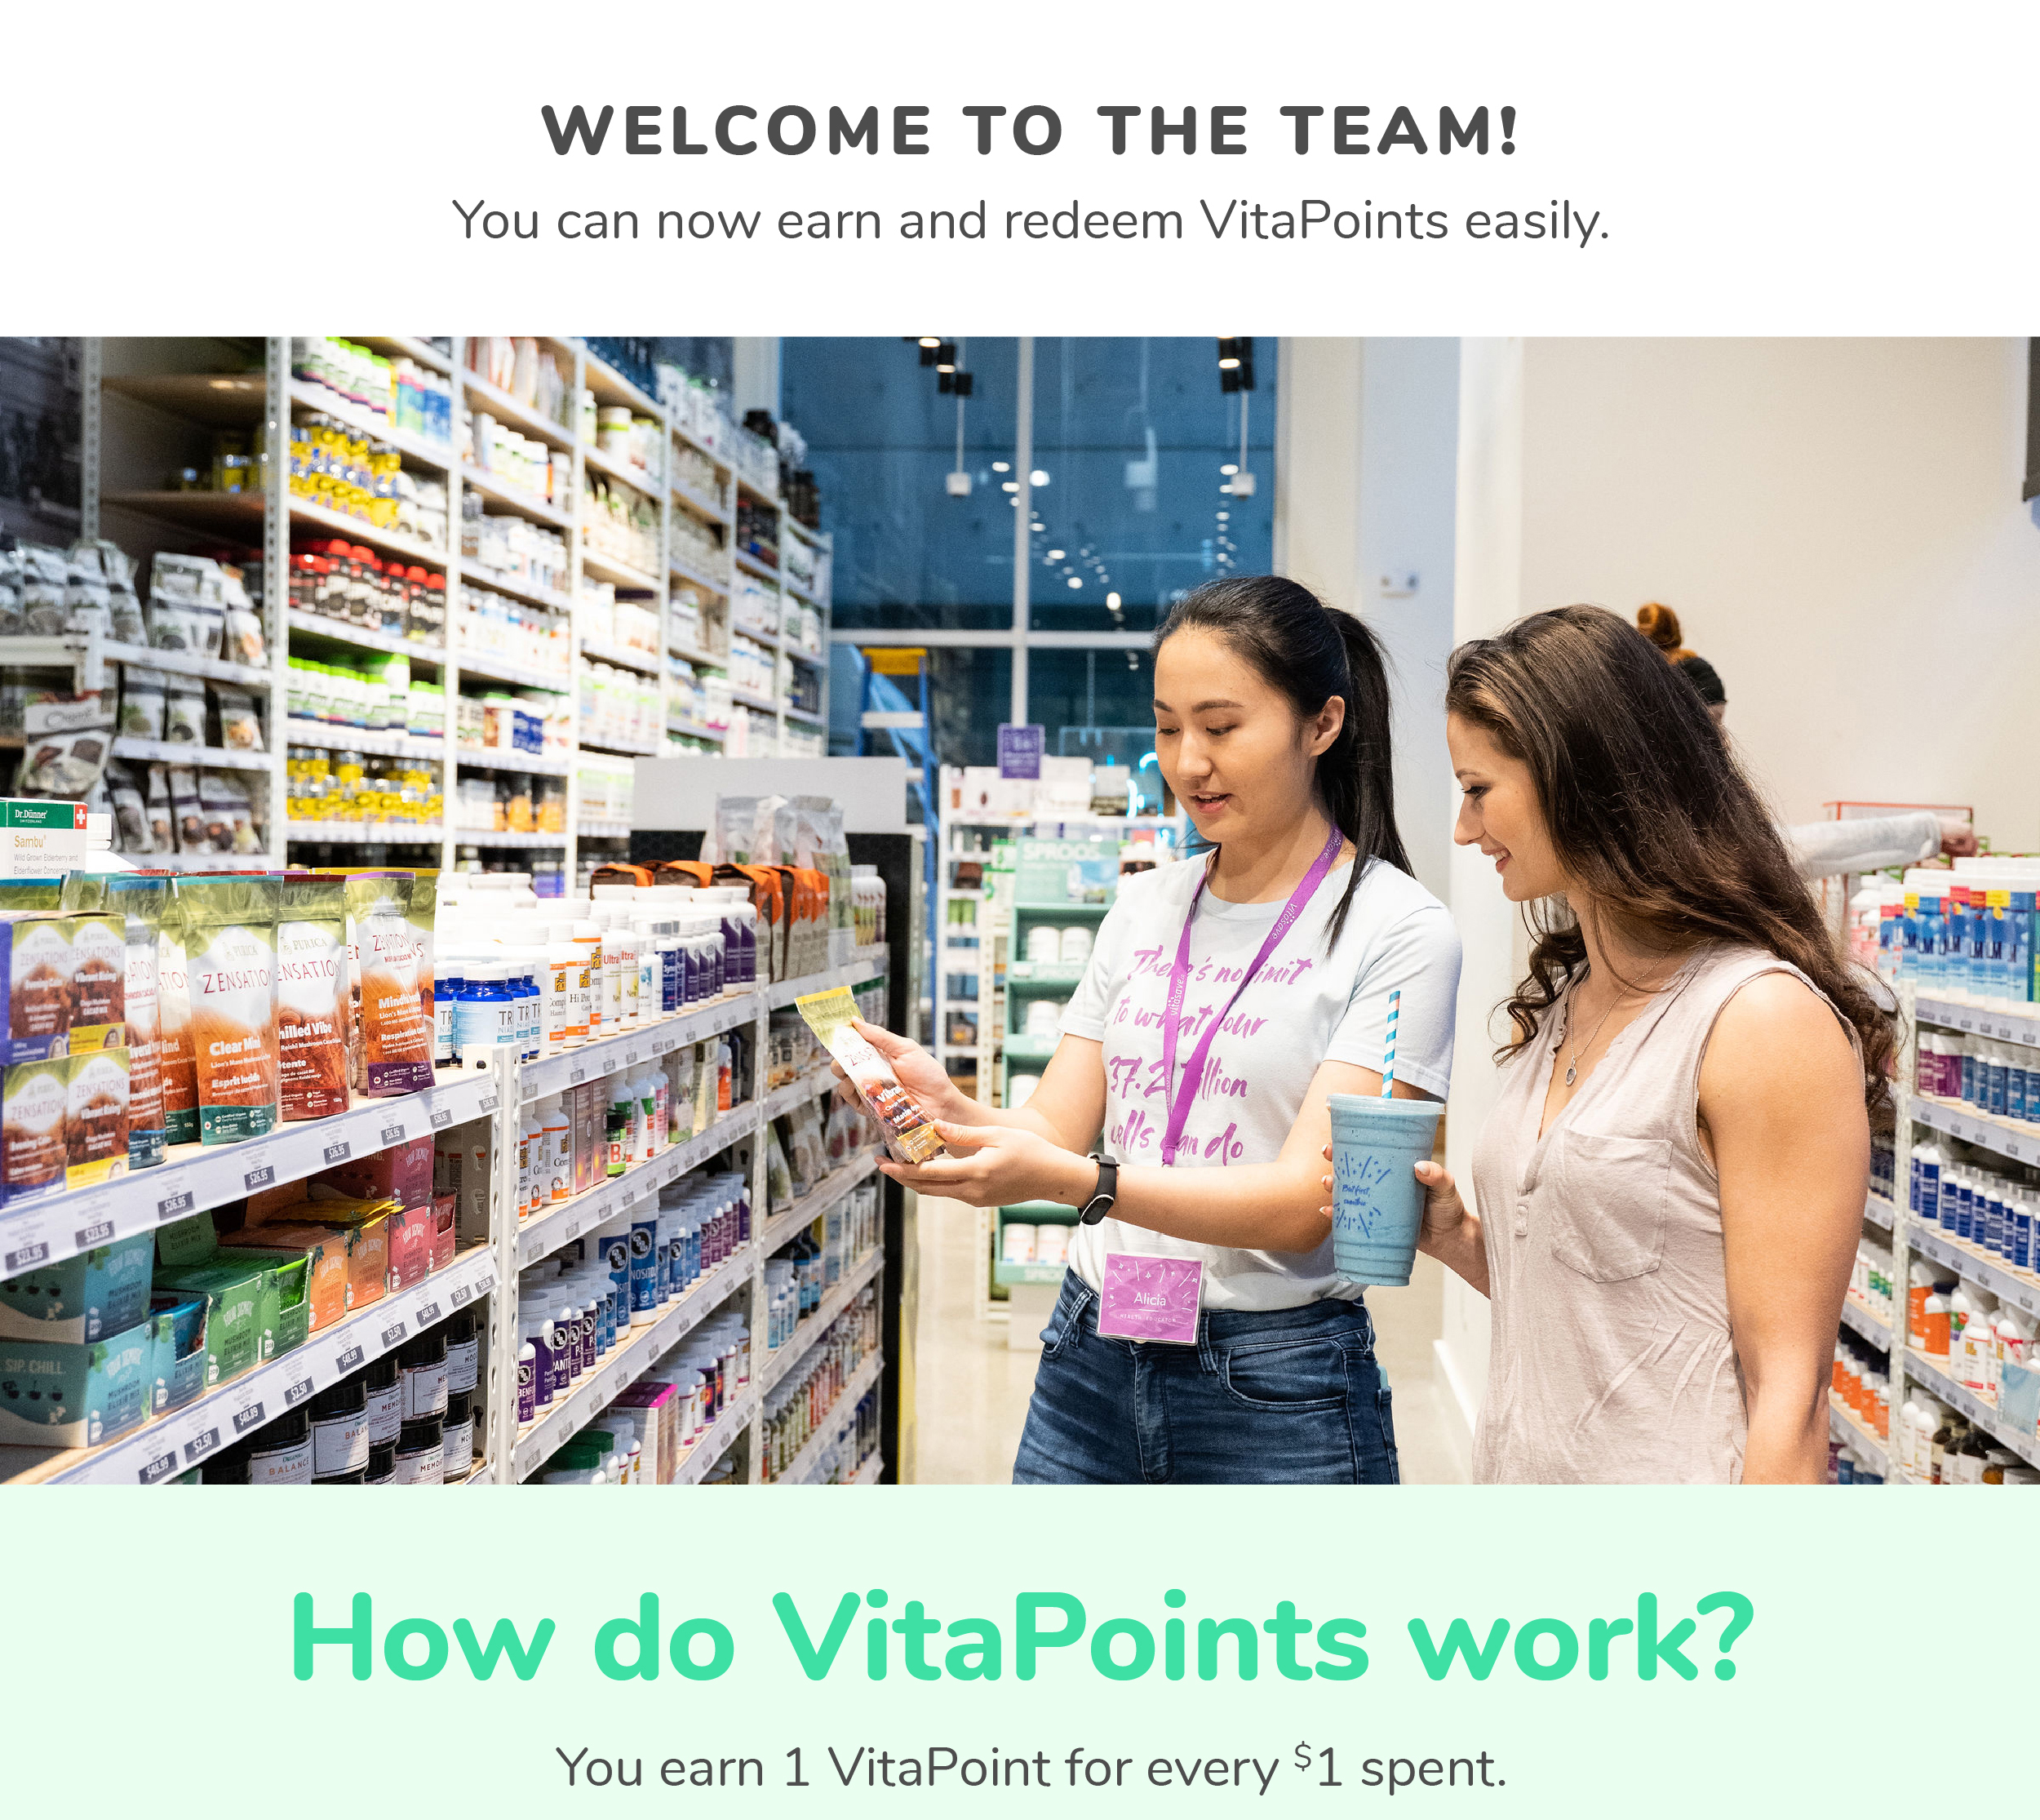 Welcome to the team! You can now earn and redeem VitaPoints easily. | How do VitaPoints work? You earn 1 VitaPoint for every $1 spent.